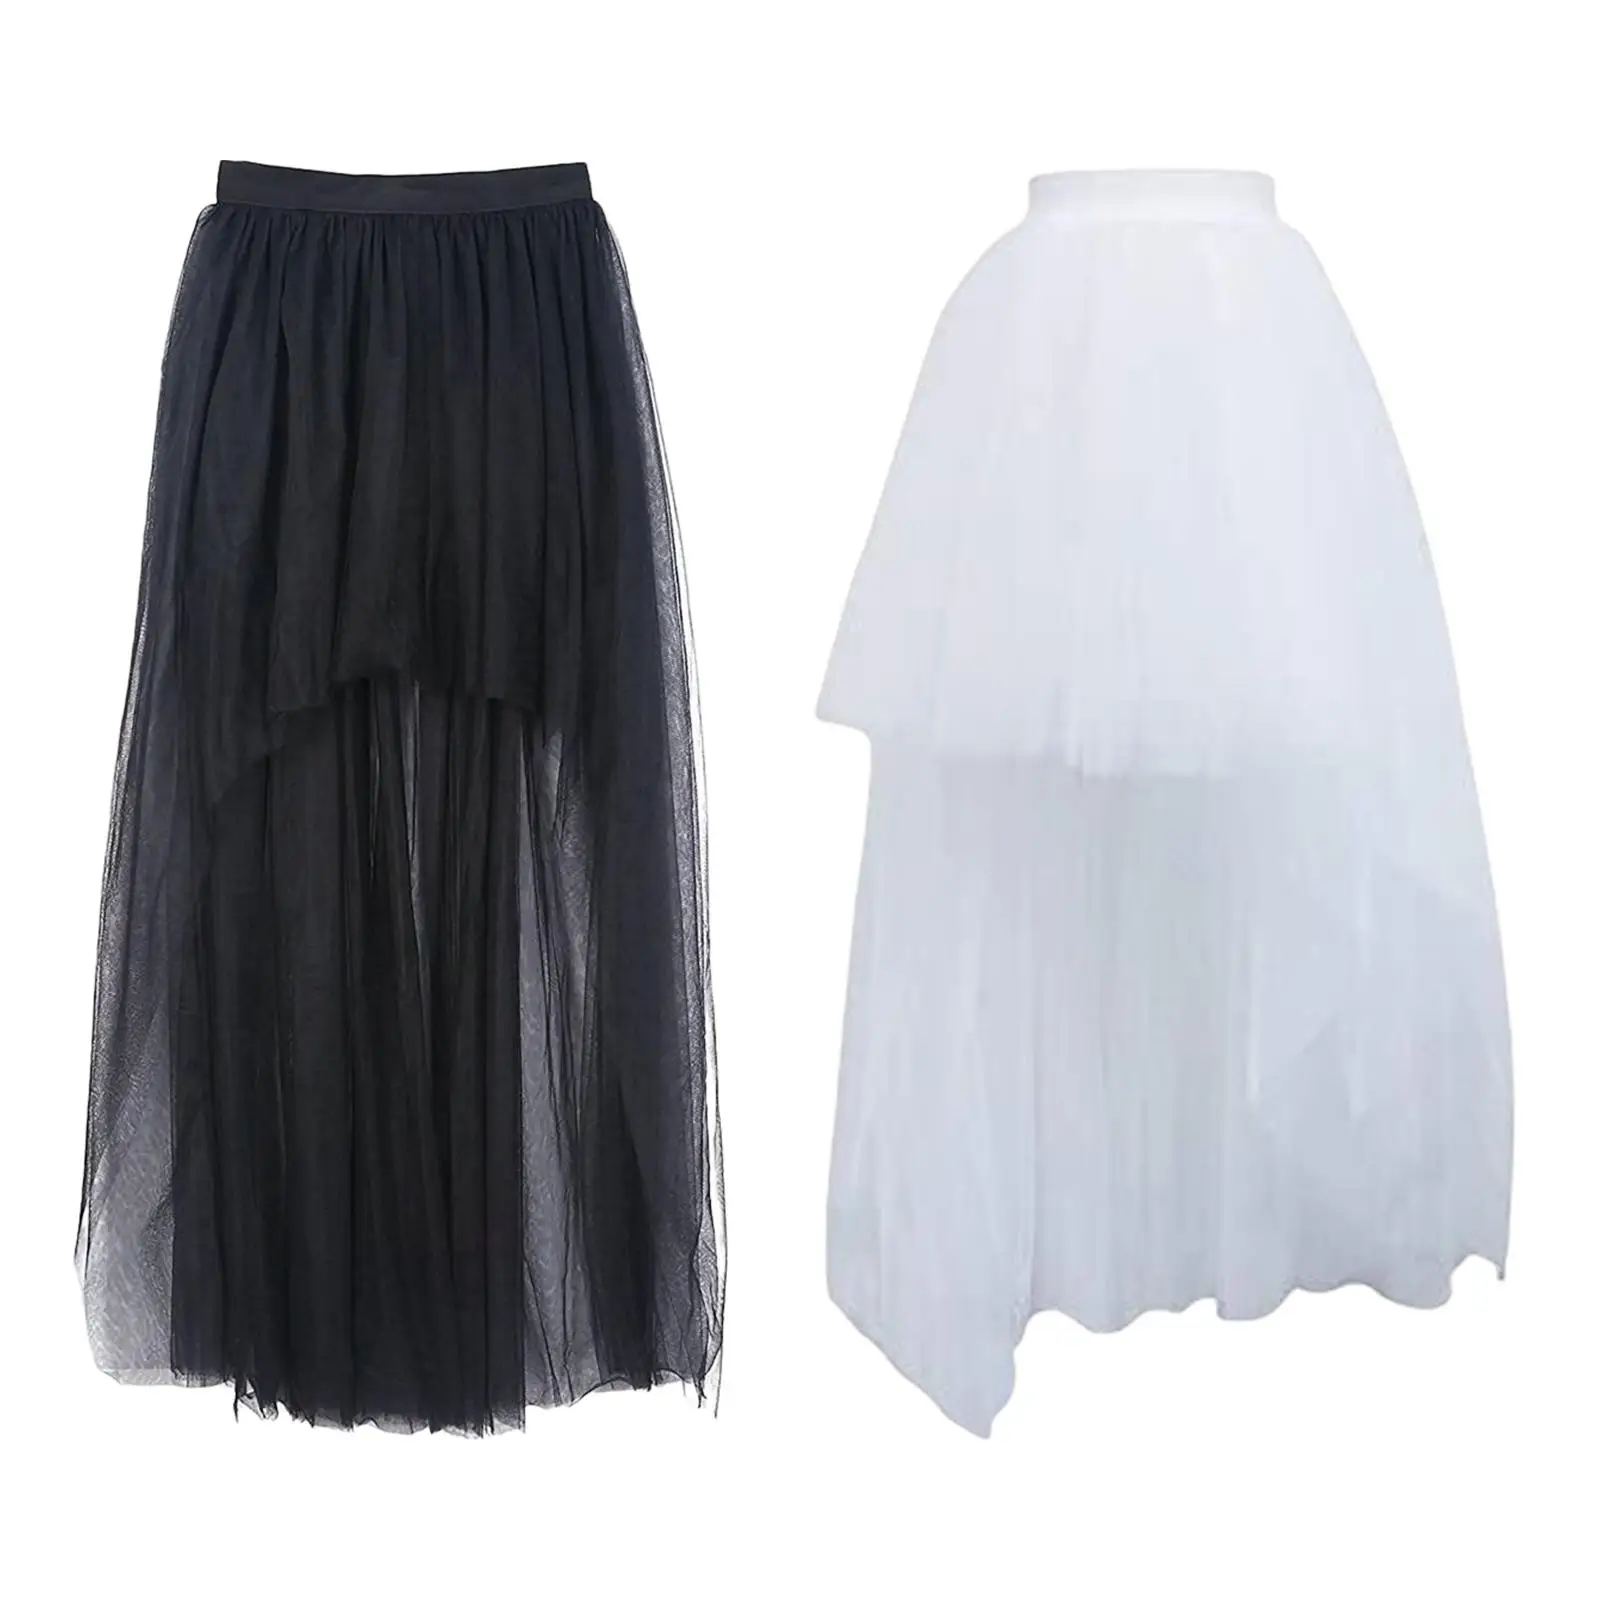 Women High Low Tutu Skirts Swallowtail Skirt Dress Tulle Skirt for Photo Prop Dress up Bridal Shower Formal Stage Performance